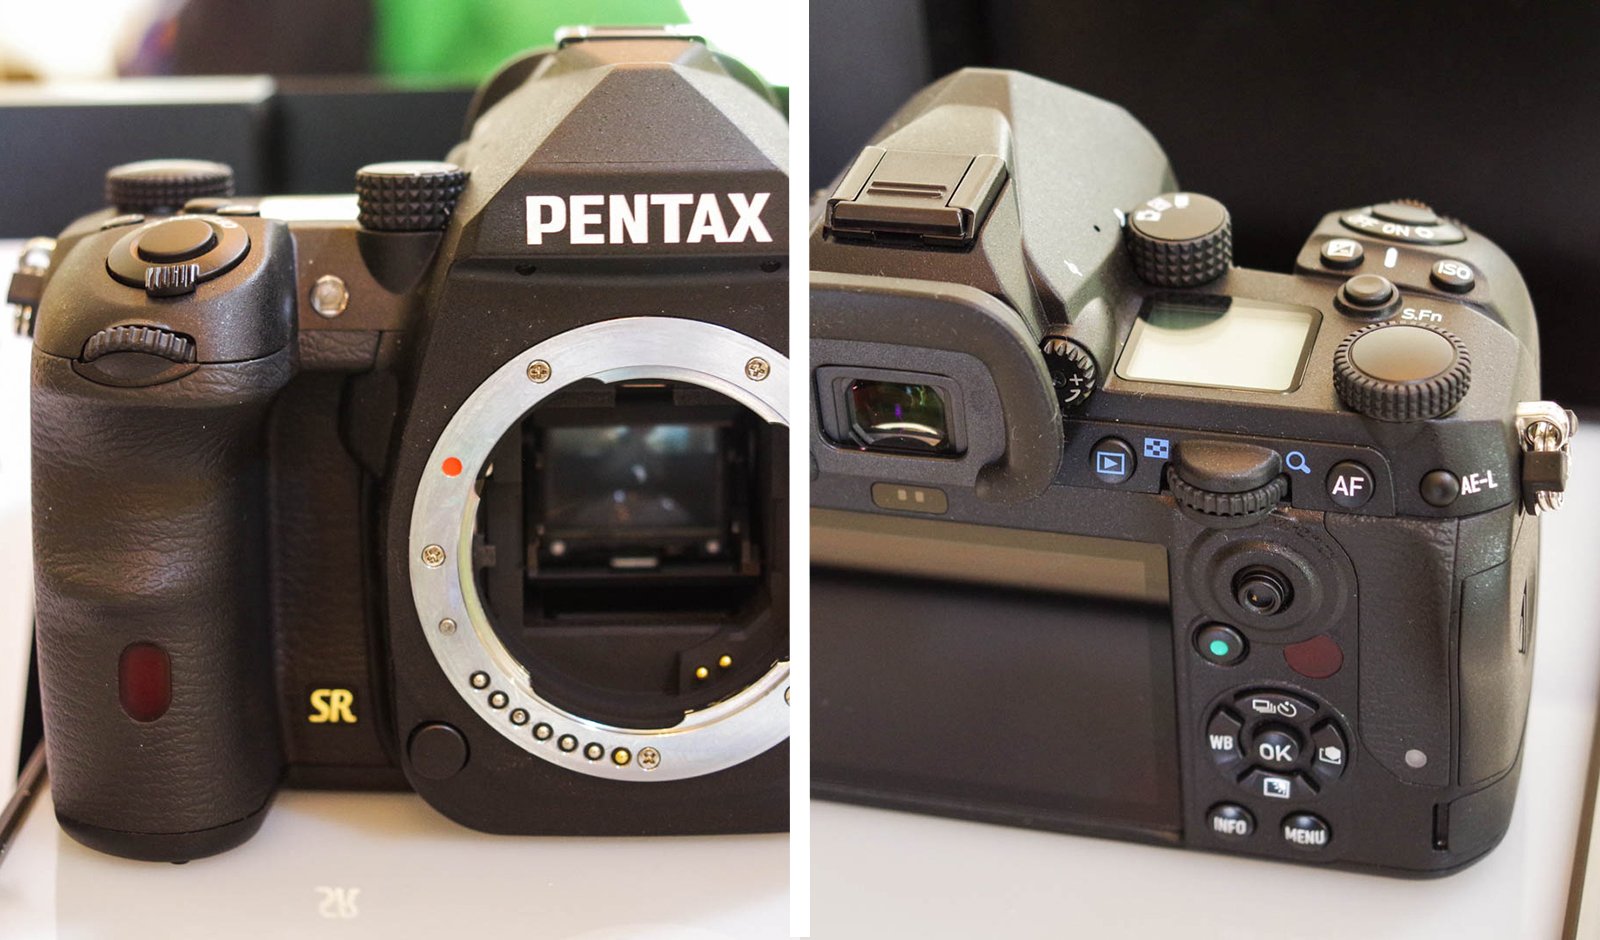 First Look: This is the Upcoming Pentax APS-C Flagship DSLR